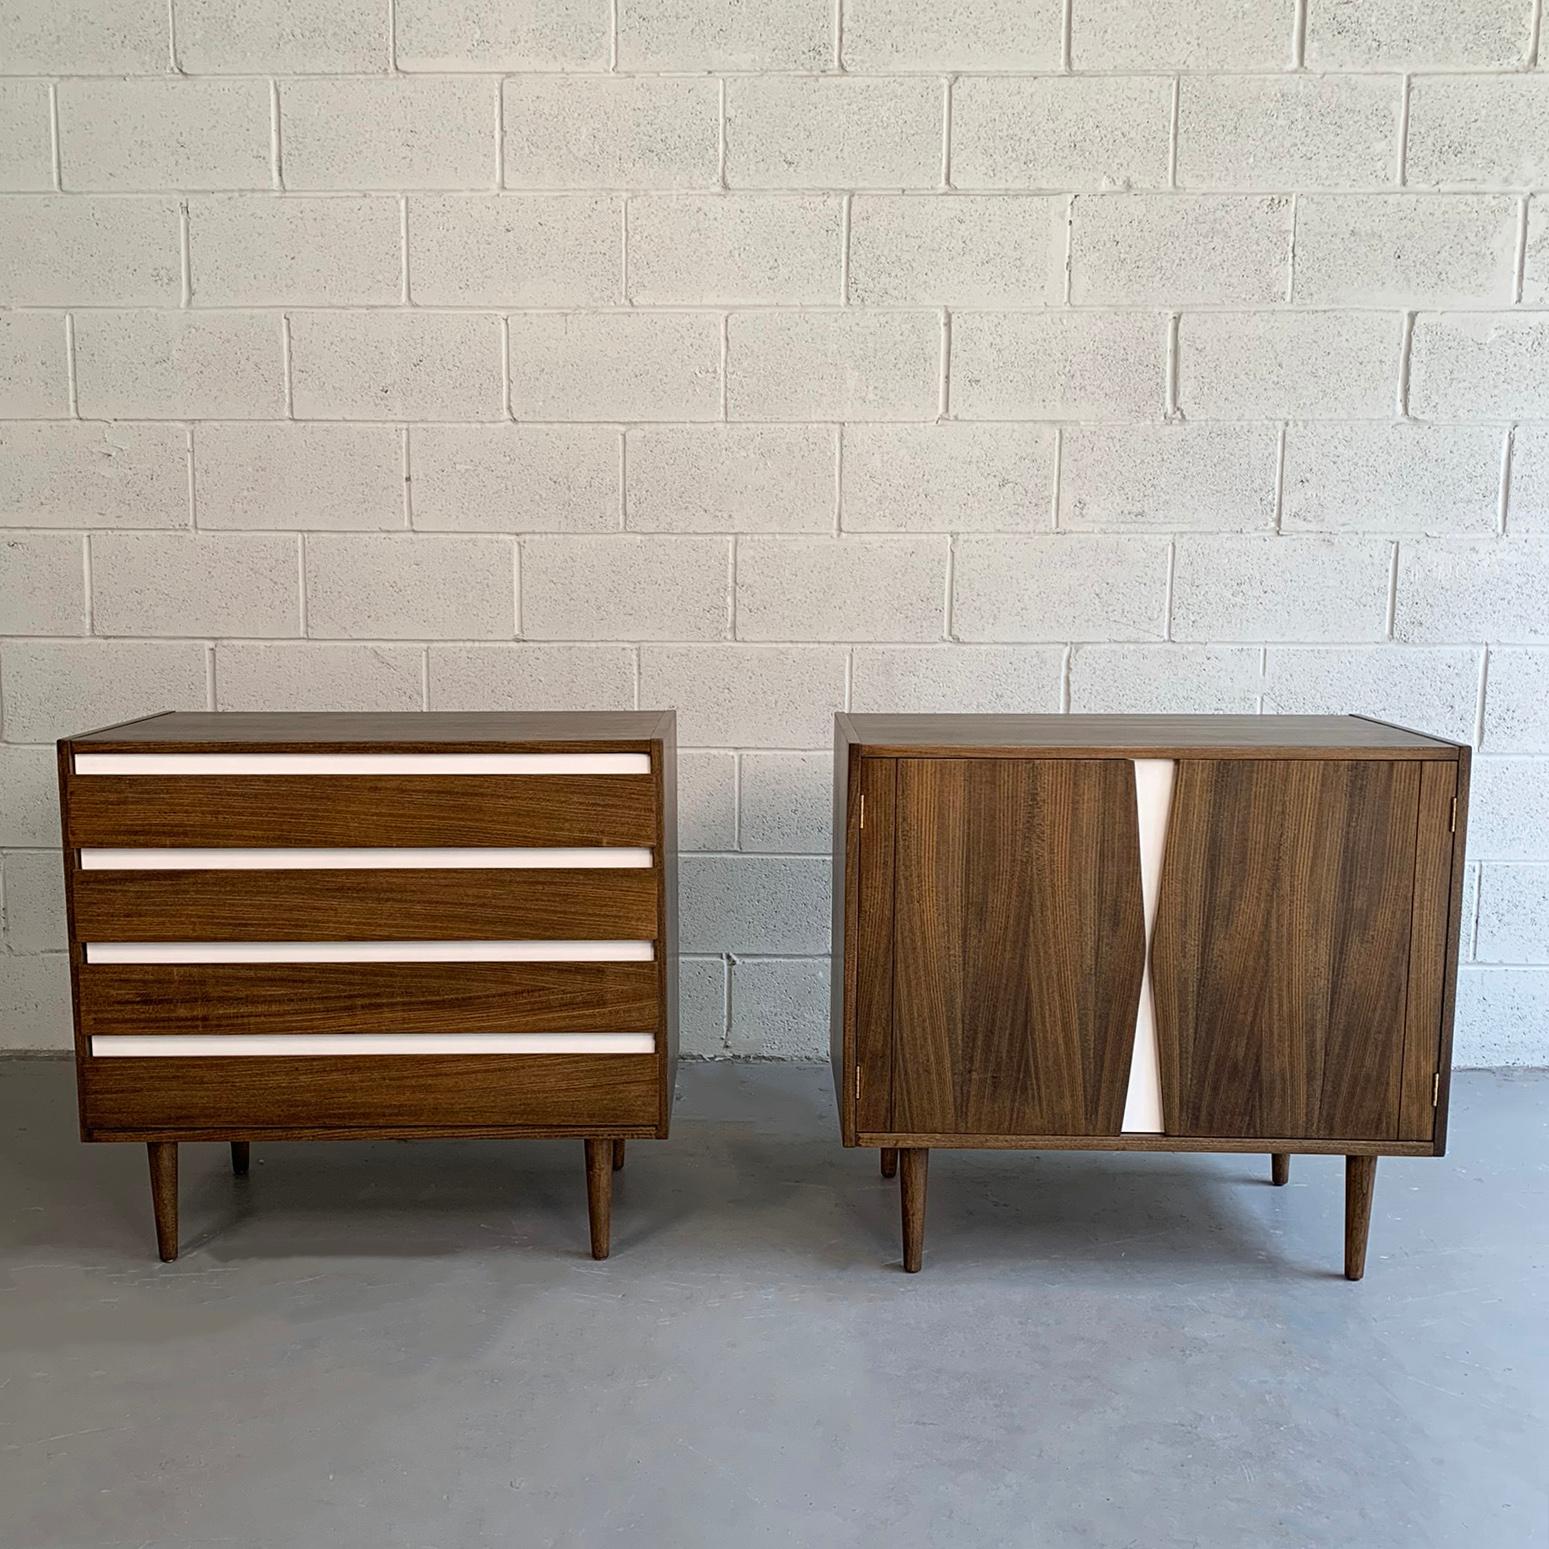 Pair of complimentary, Mid-Century Modern, dresser cabinets by American of Martinsville are walnut with white laminate accents. One cabinet is a dresser that features 4 drawers and the other is a short credenza configuration with interior shelves.